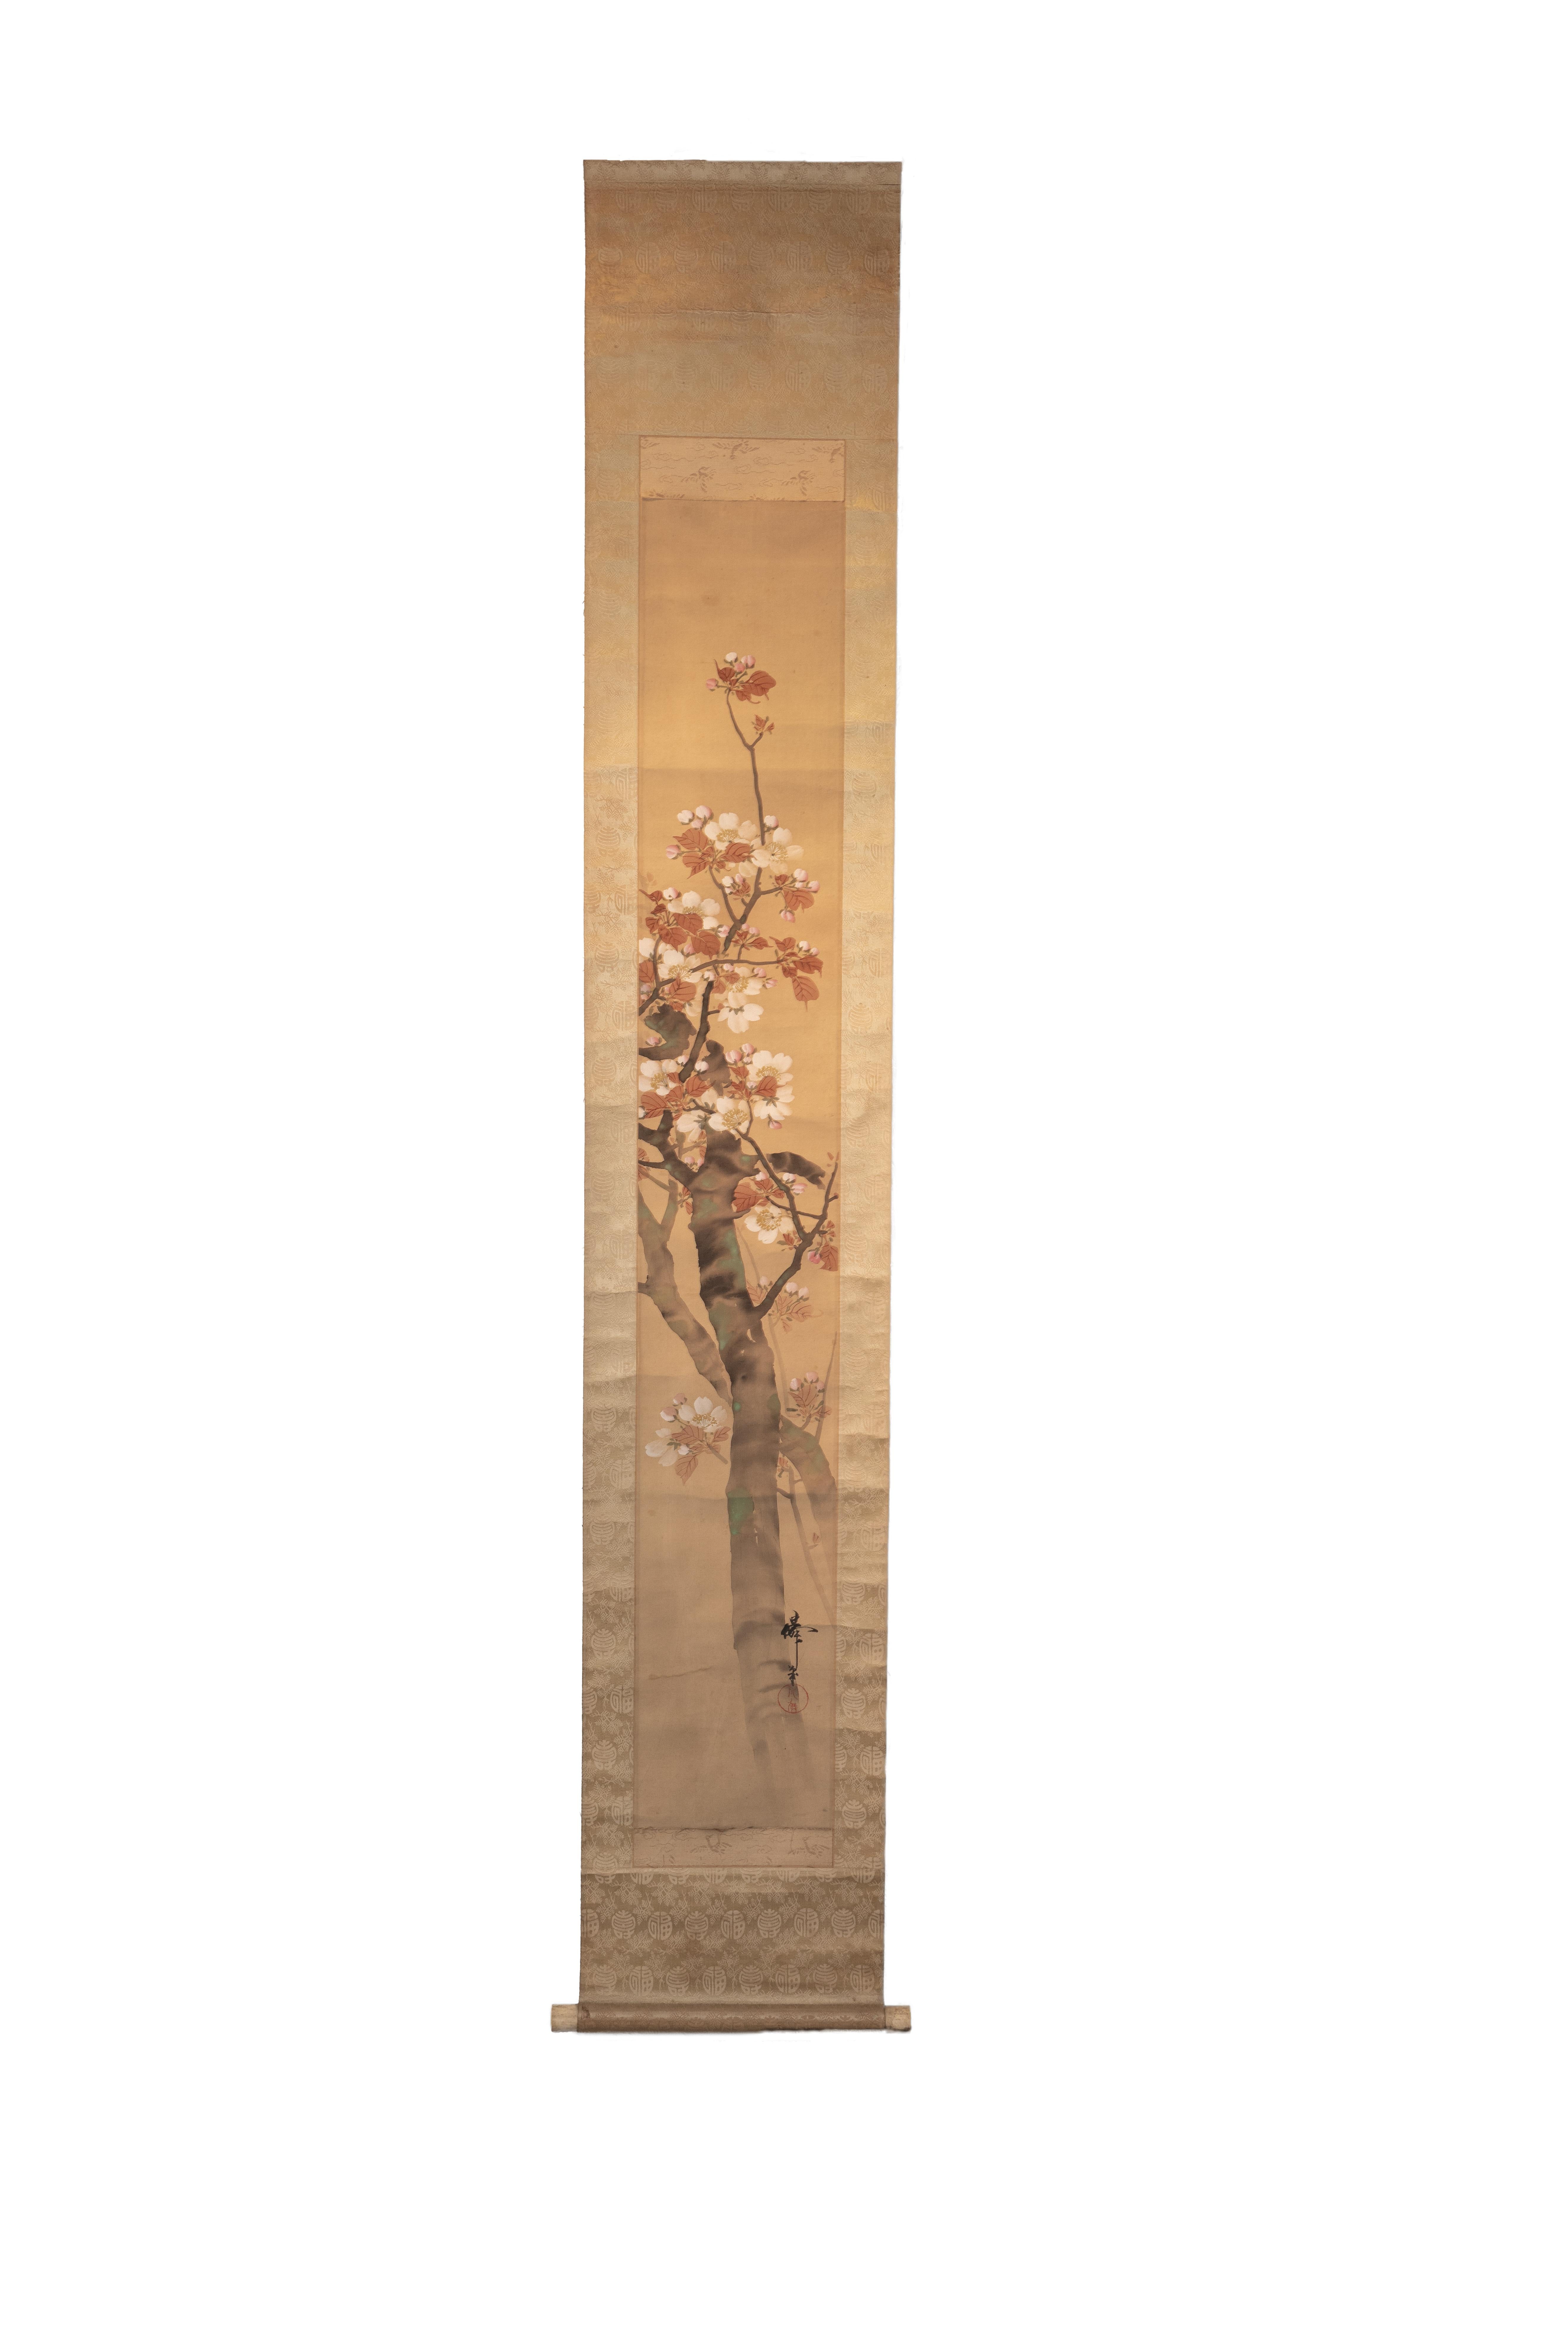 'Dogwood Tree', By Unknown, Japanese Antique Scroll